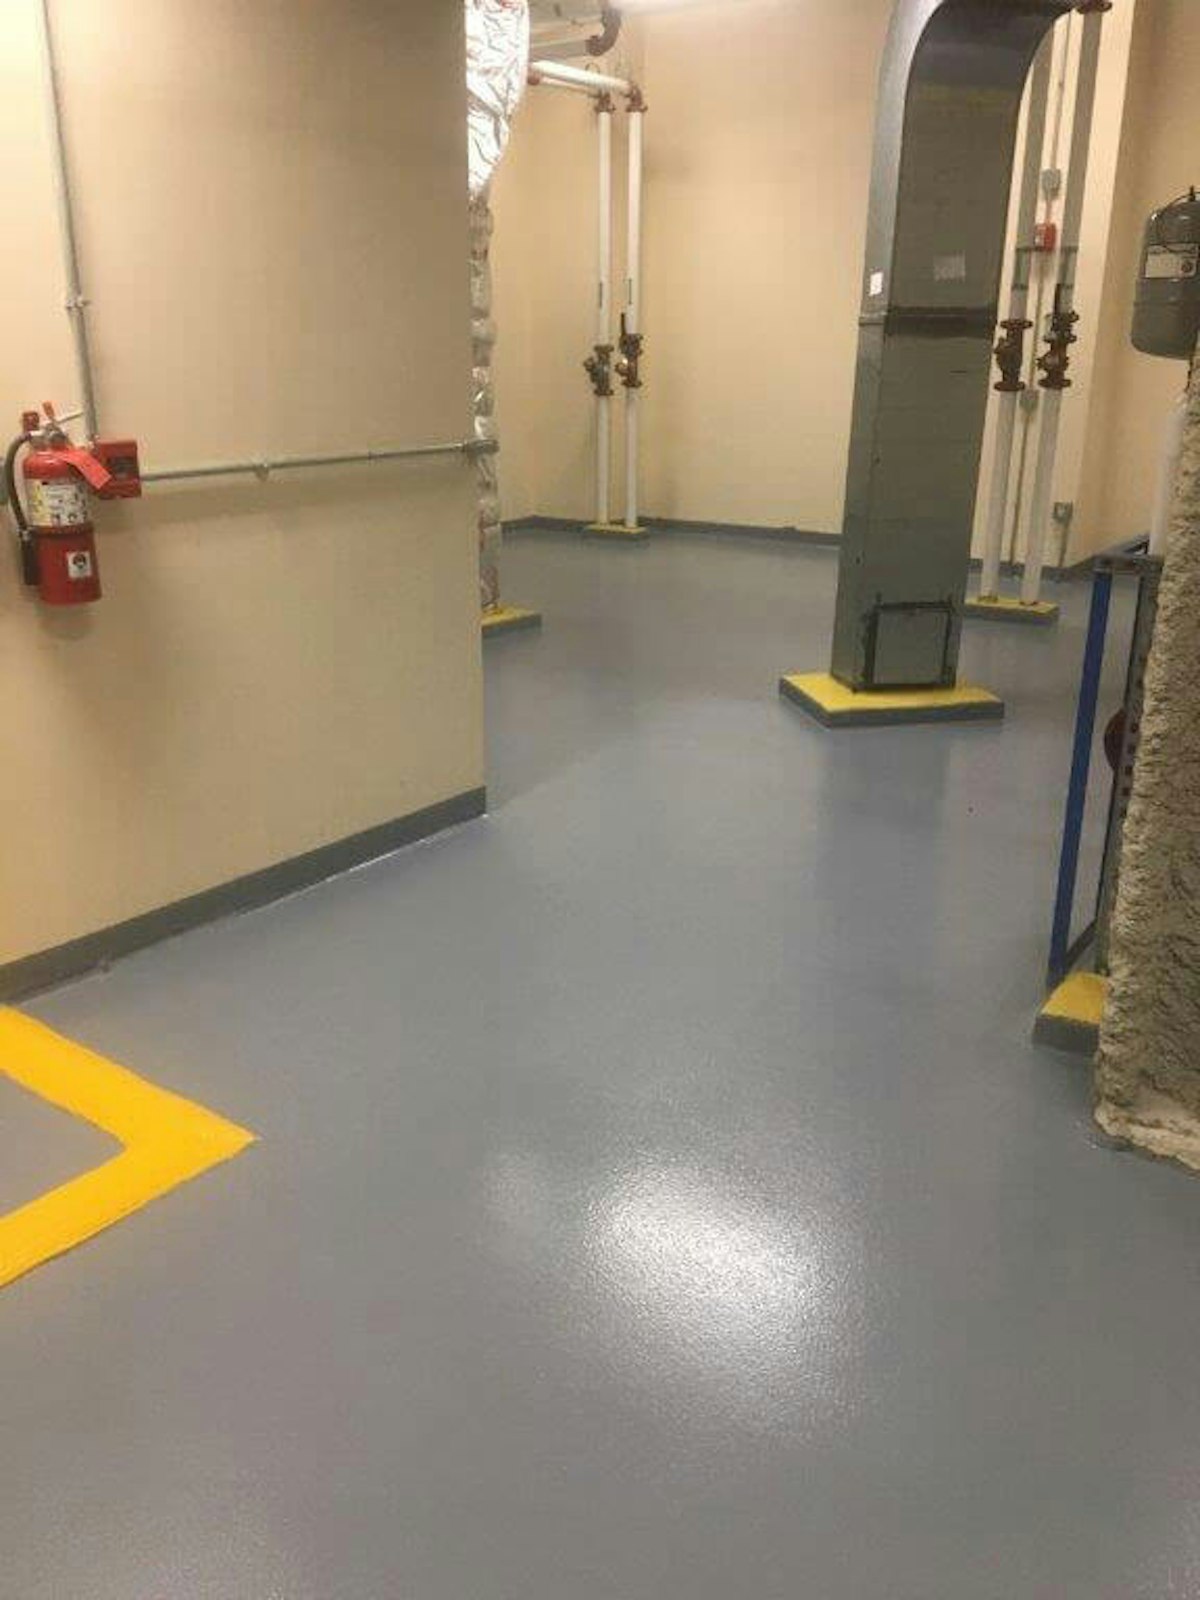  Commercial Flooring: Expected Cost